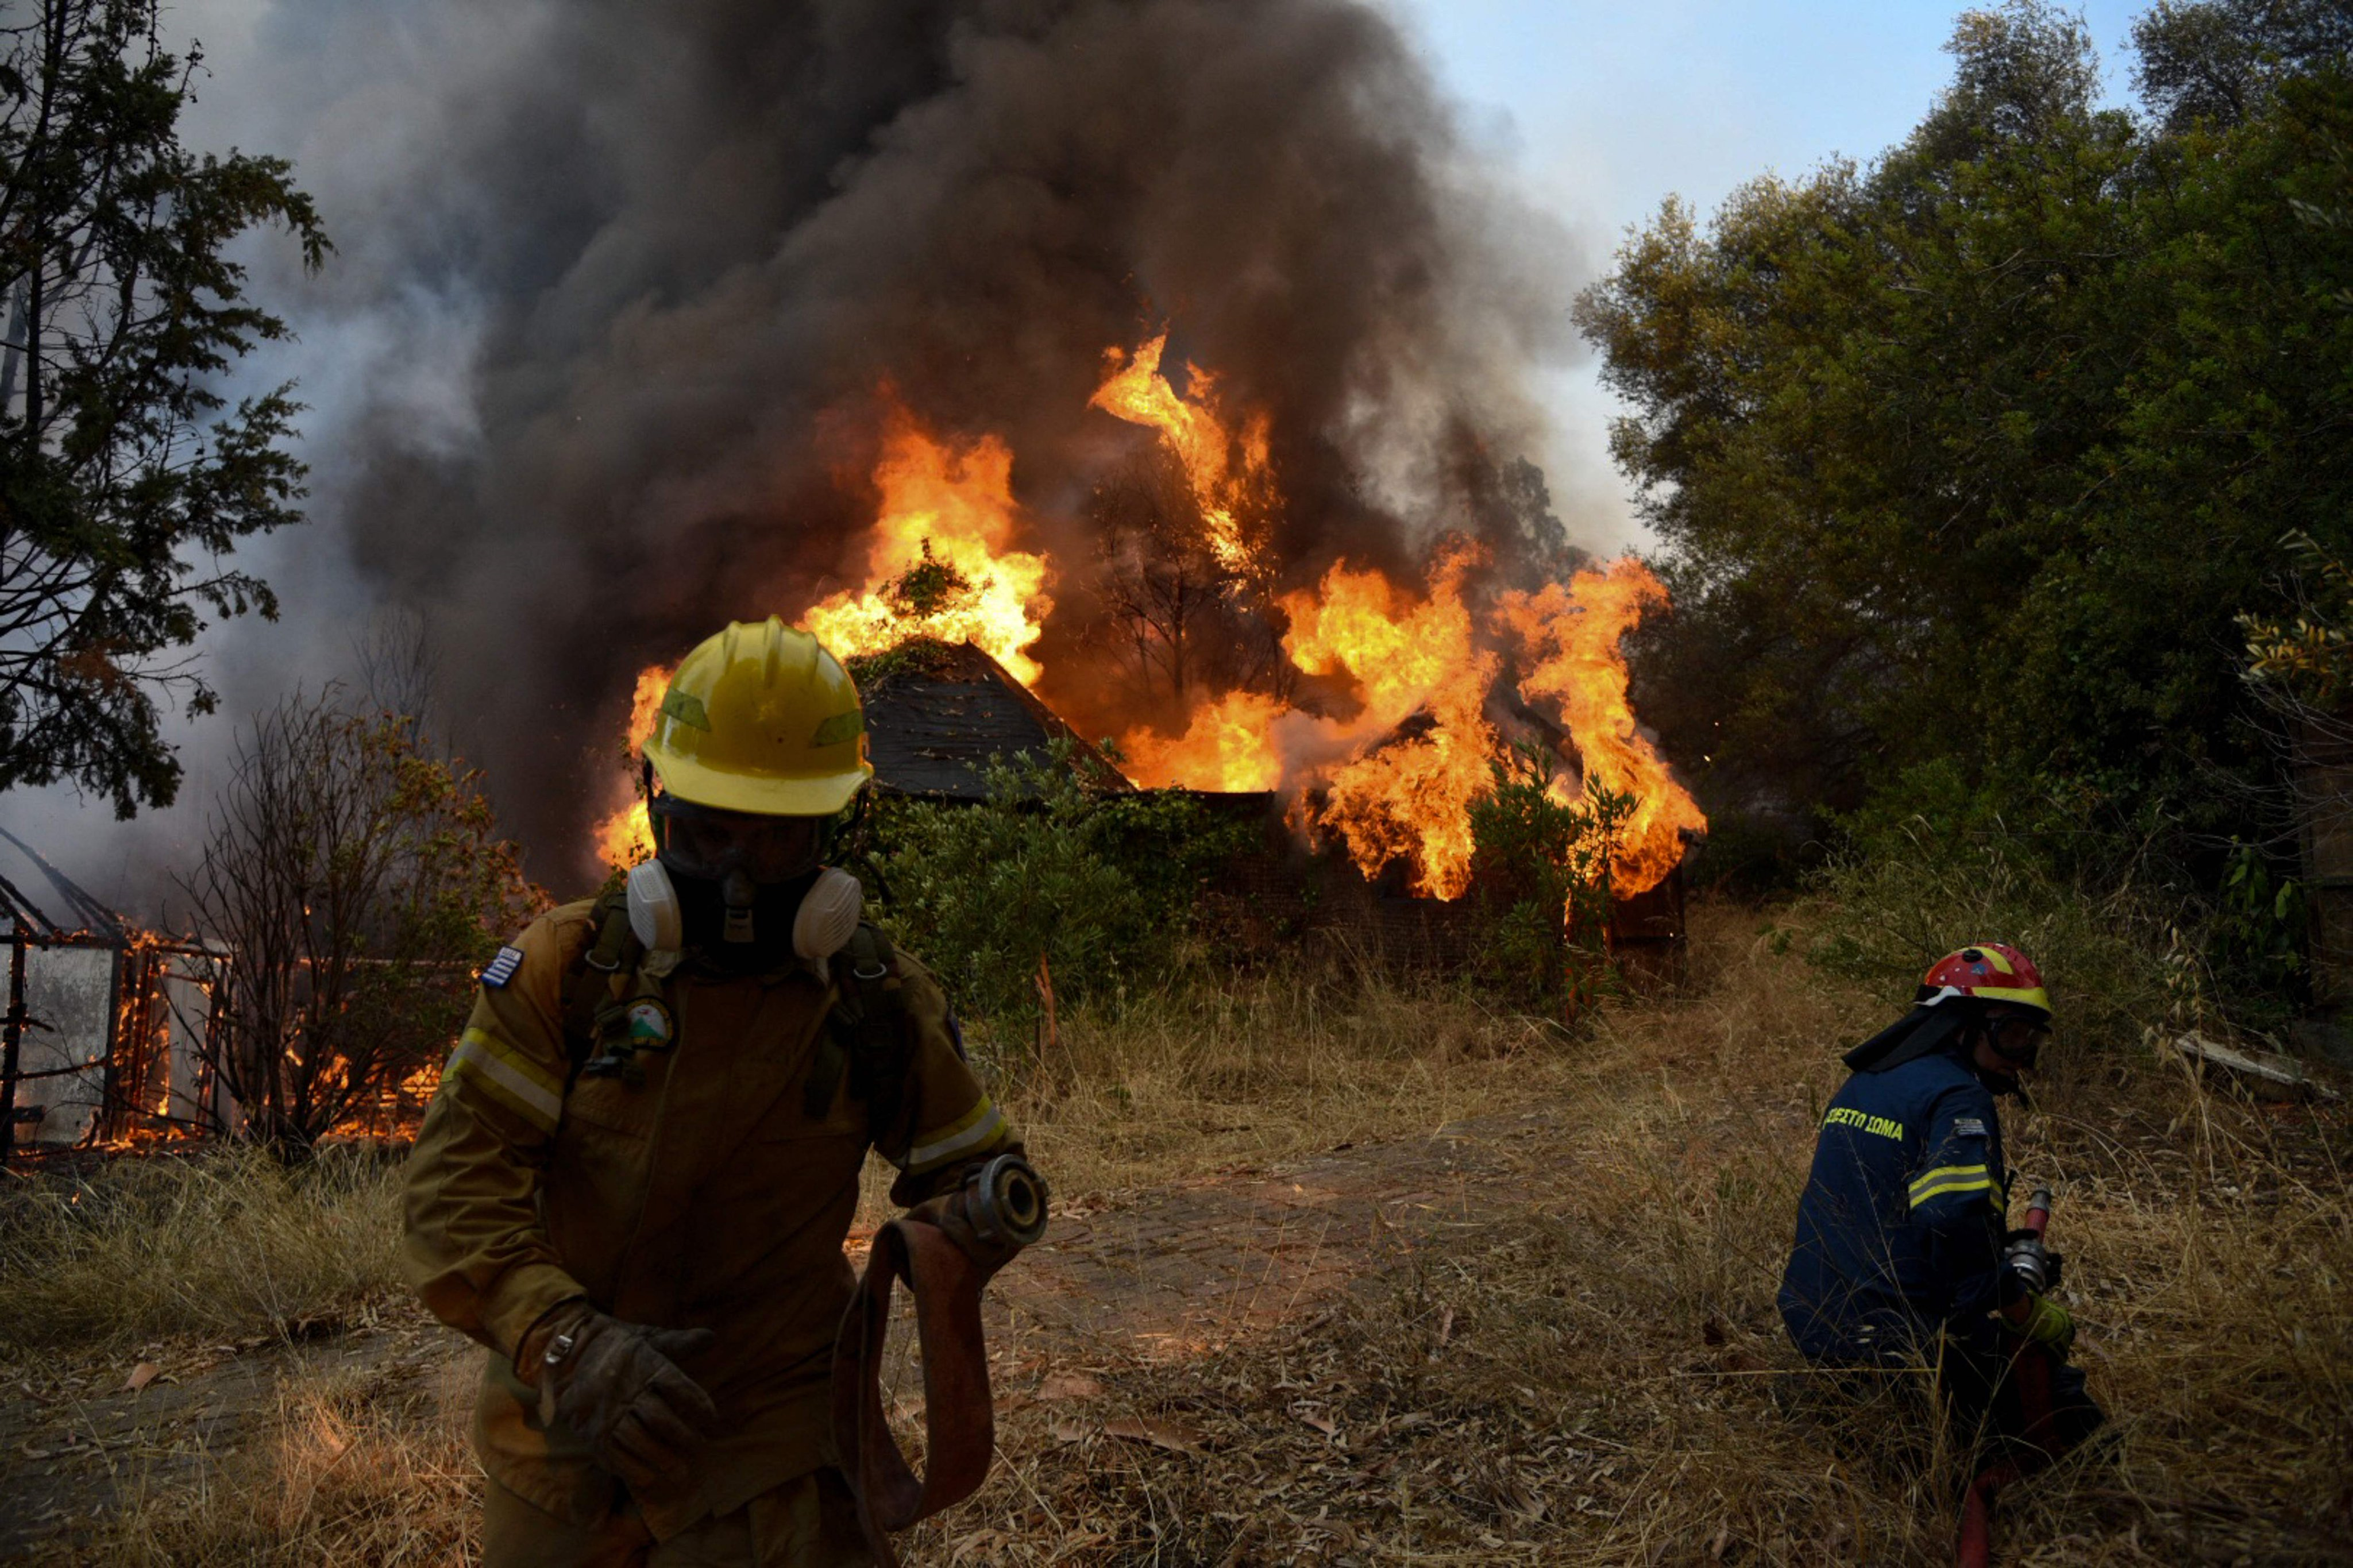 In Greece a total of 56 wildfires have broken out in the past 24 hours in the country